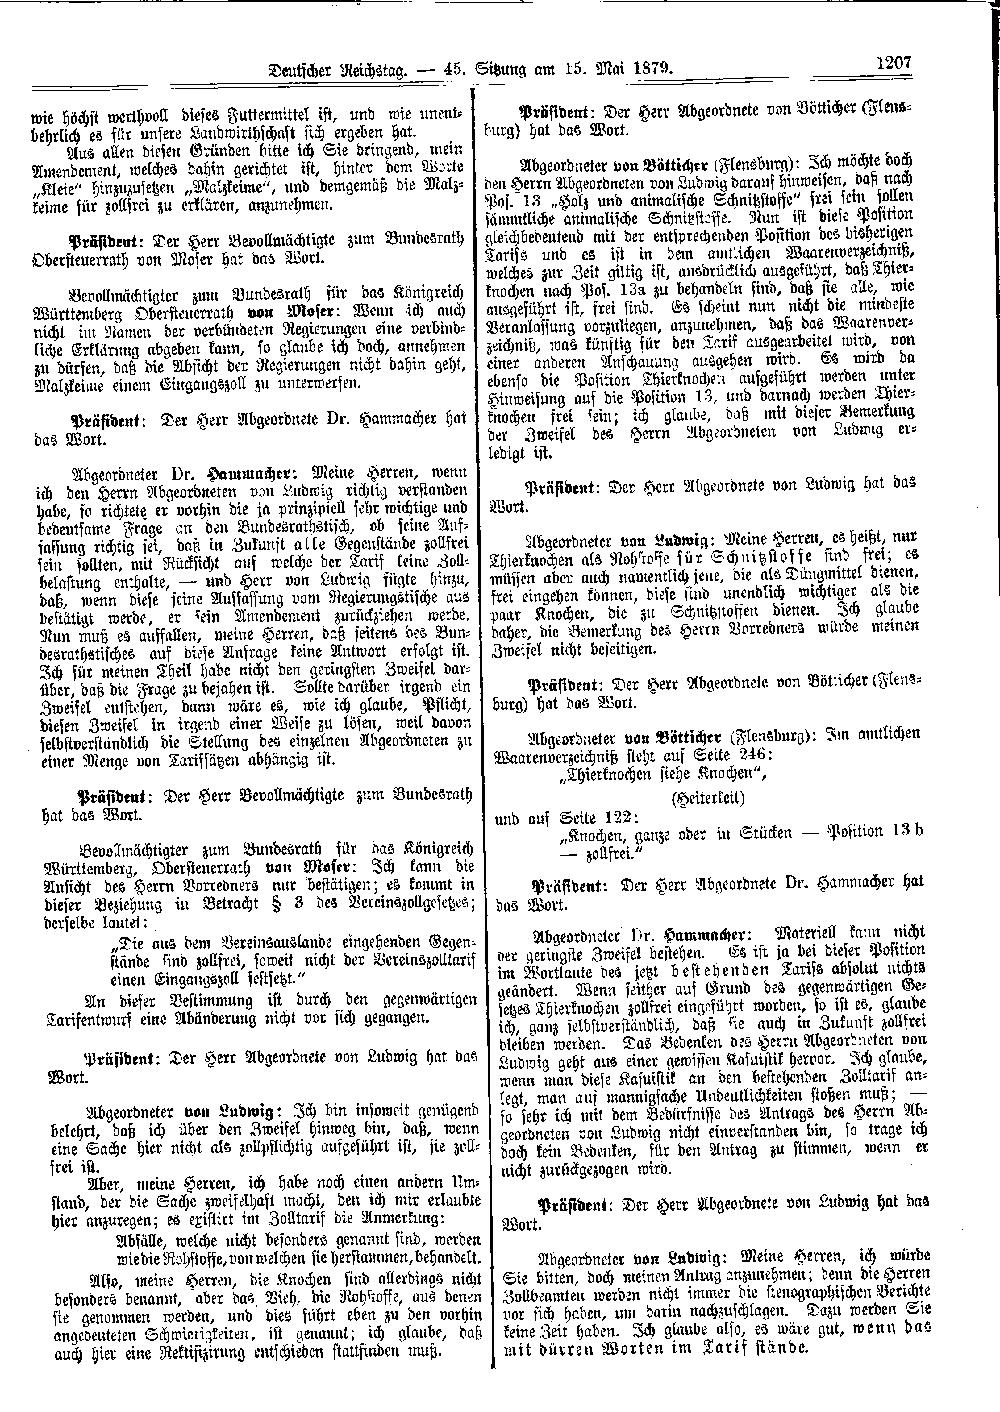 Scan of page 1207